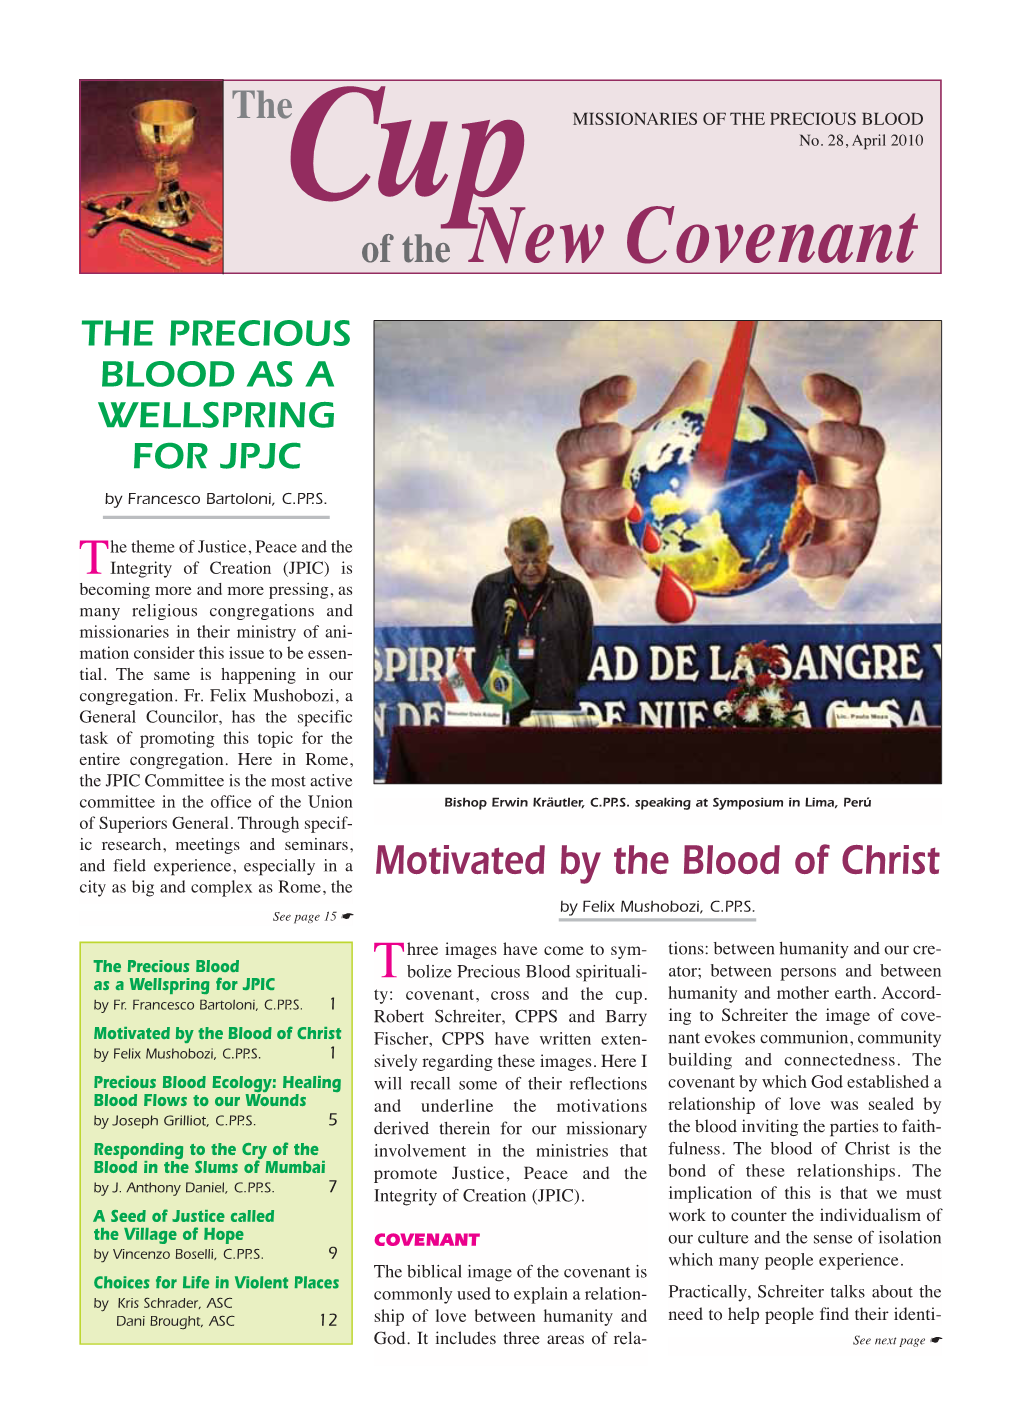 Of the New Covenant